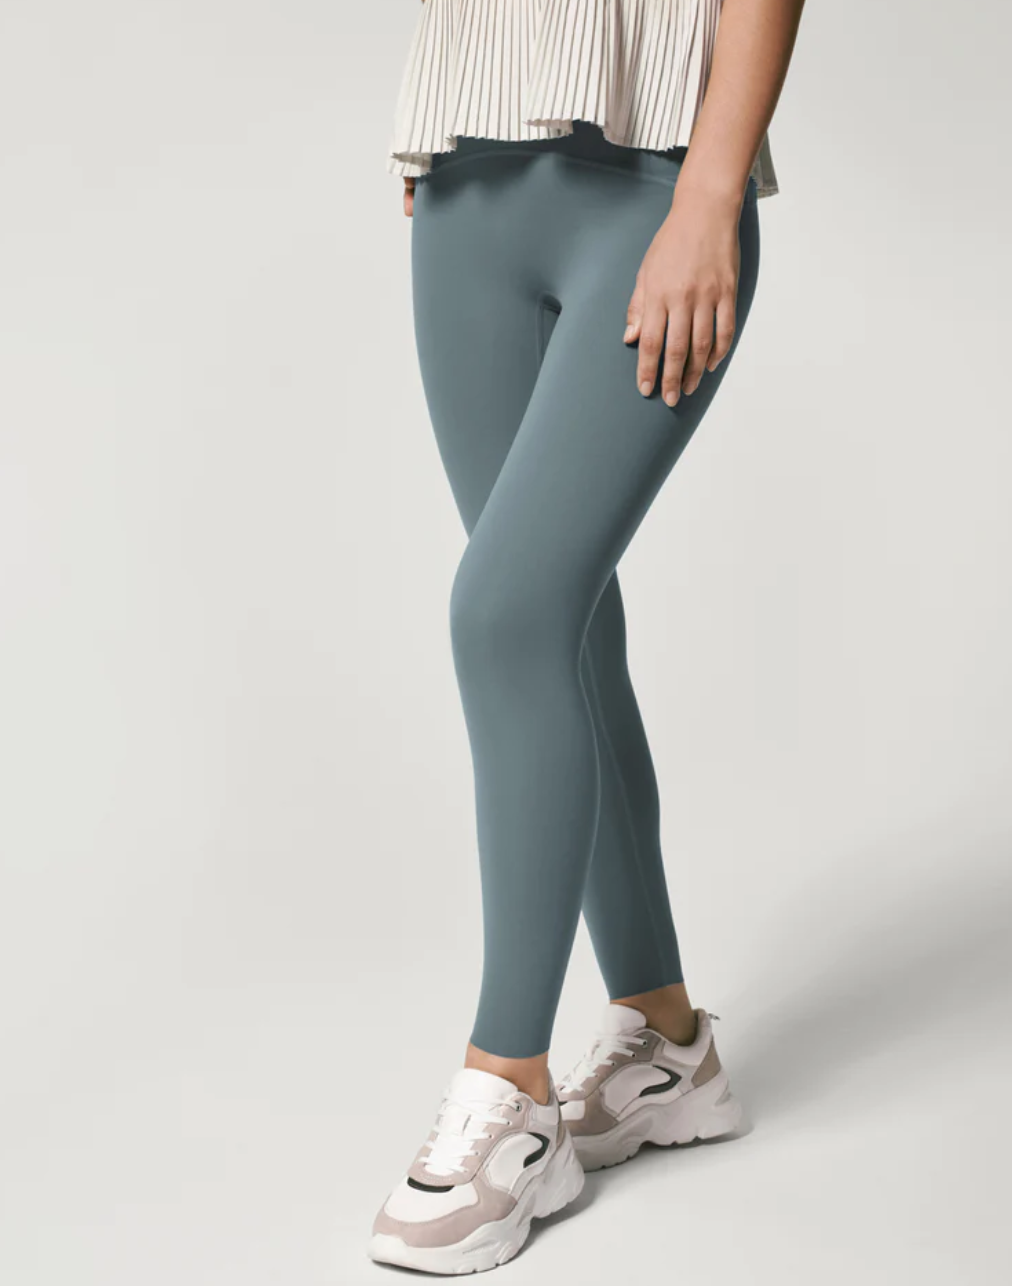 Booty Boost Active Leggings